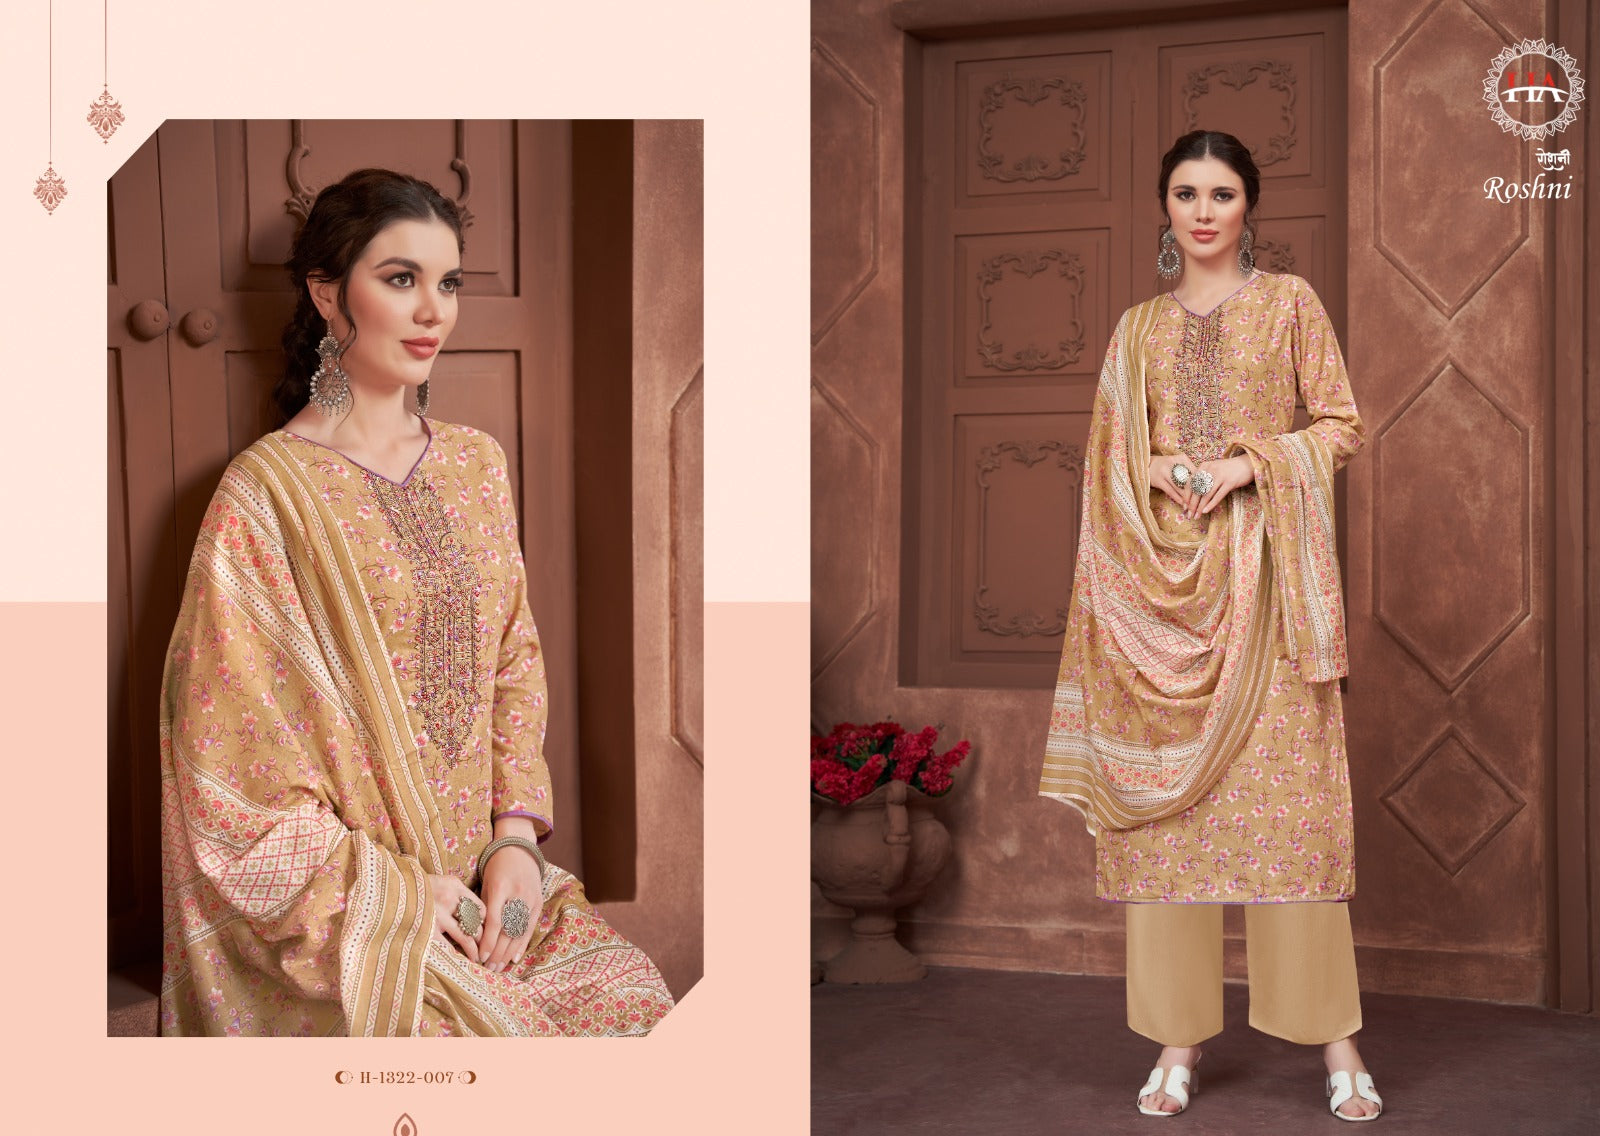 Harshit fashion hub roshni cotton with embroidery work salwar suits wholesale supplier - jilaniwholesalesuit